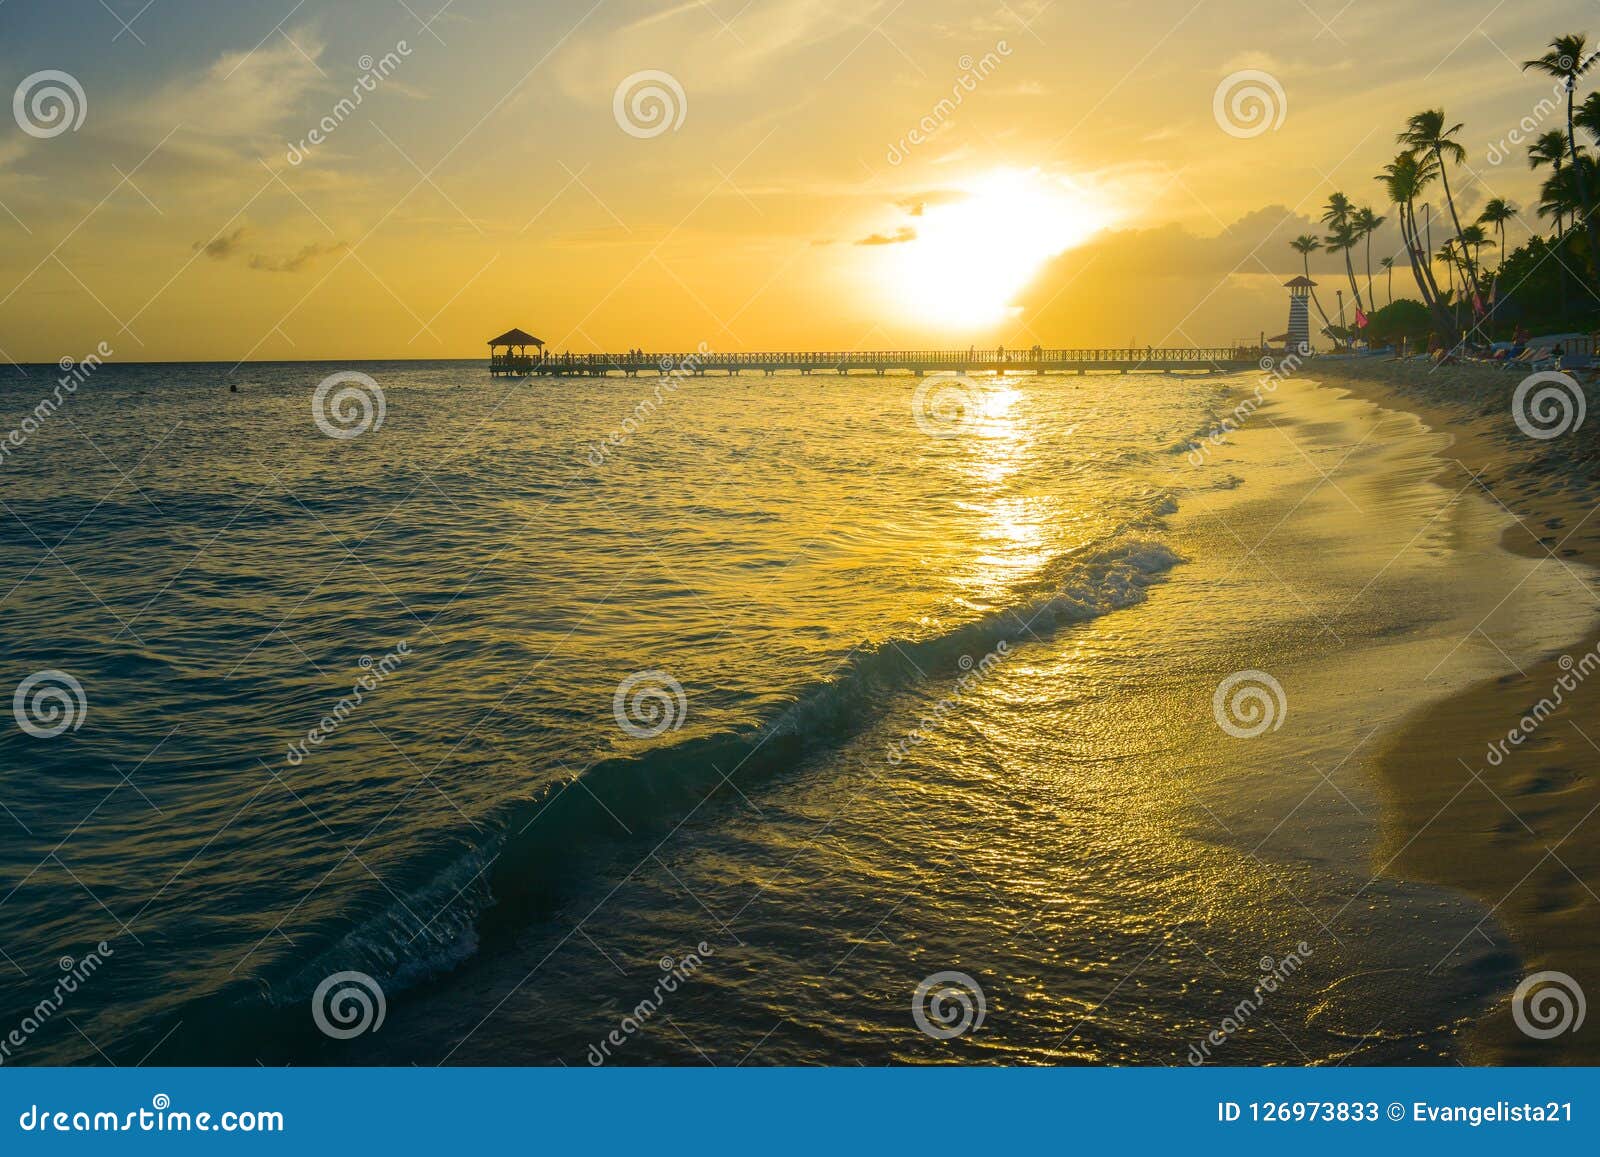 sunset at bayahibe beach in dominican republic